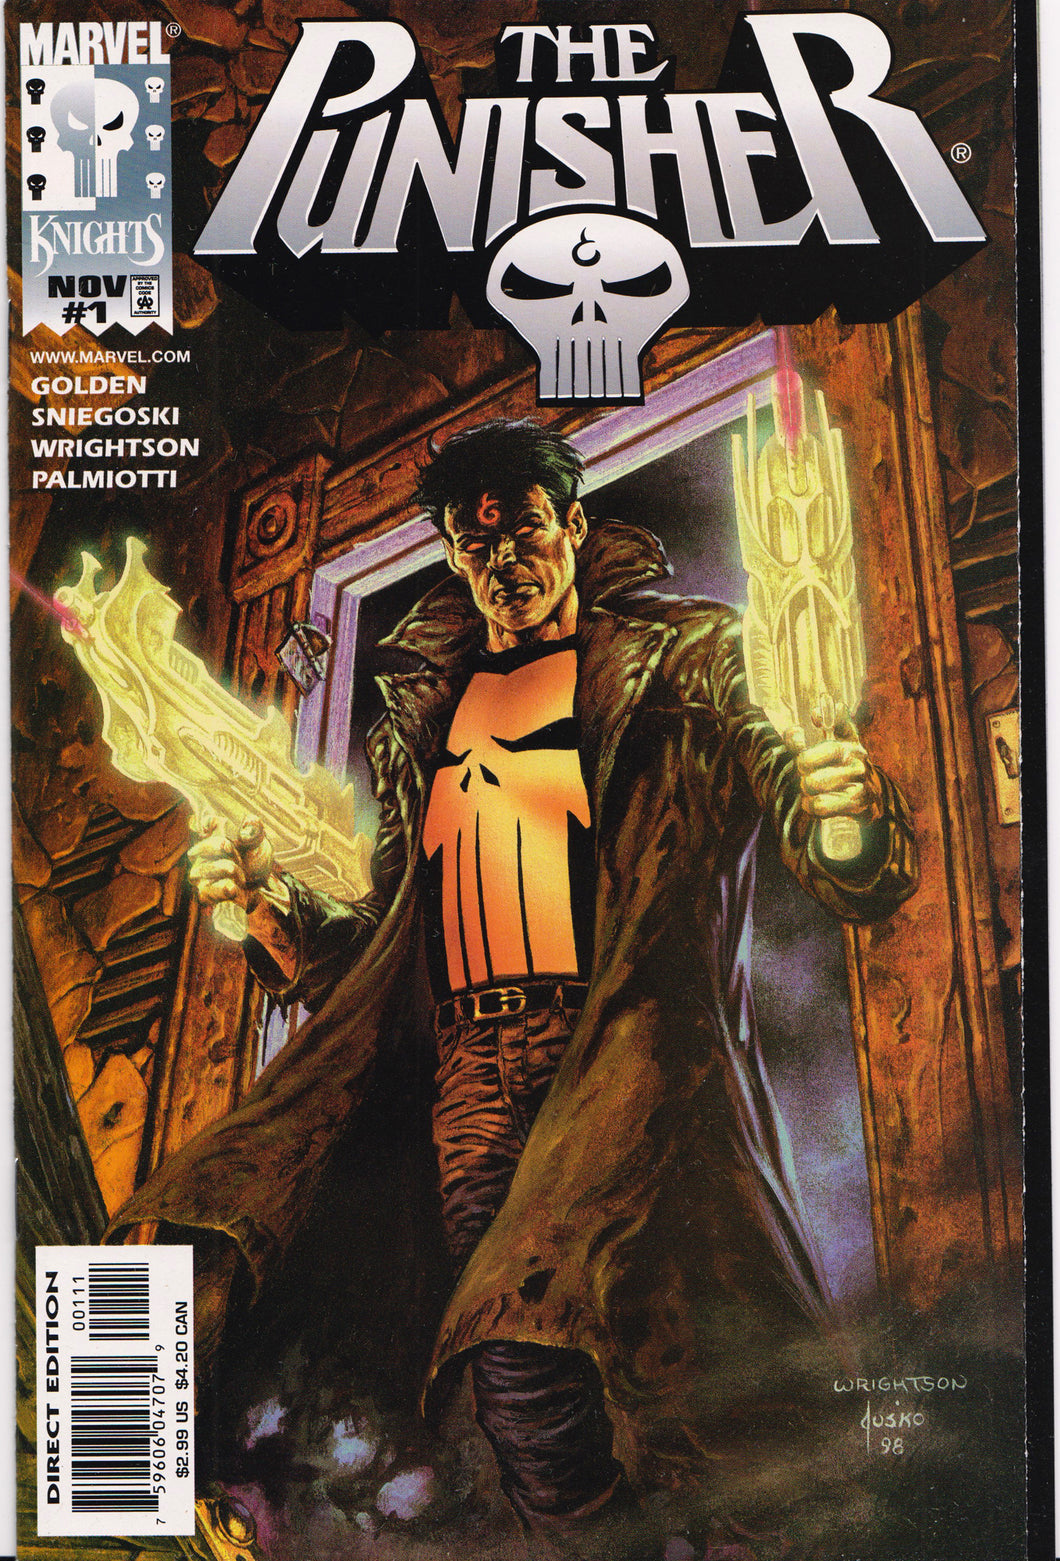 THE PUNISHER #1 (MARVEL KNIGHTS) COMIC BOOK ~ Marvel Comics